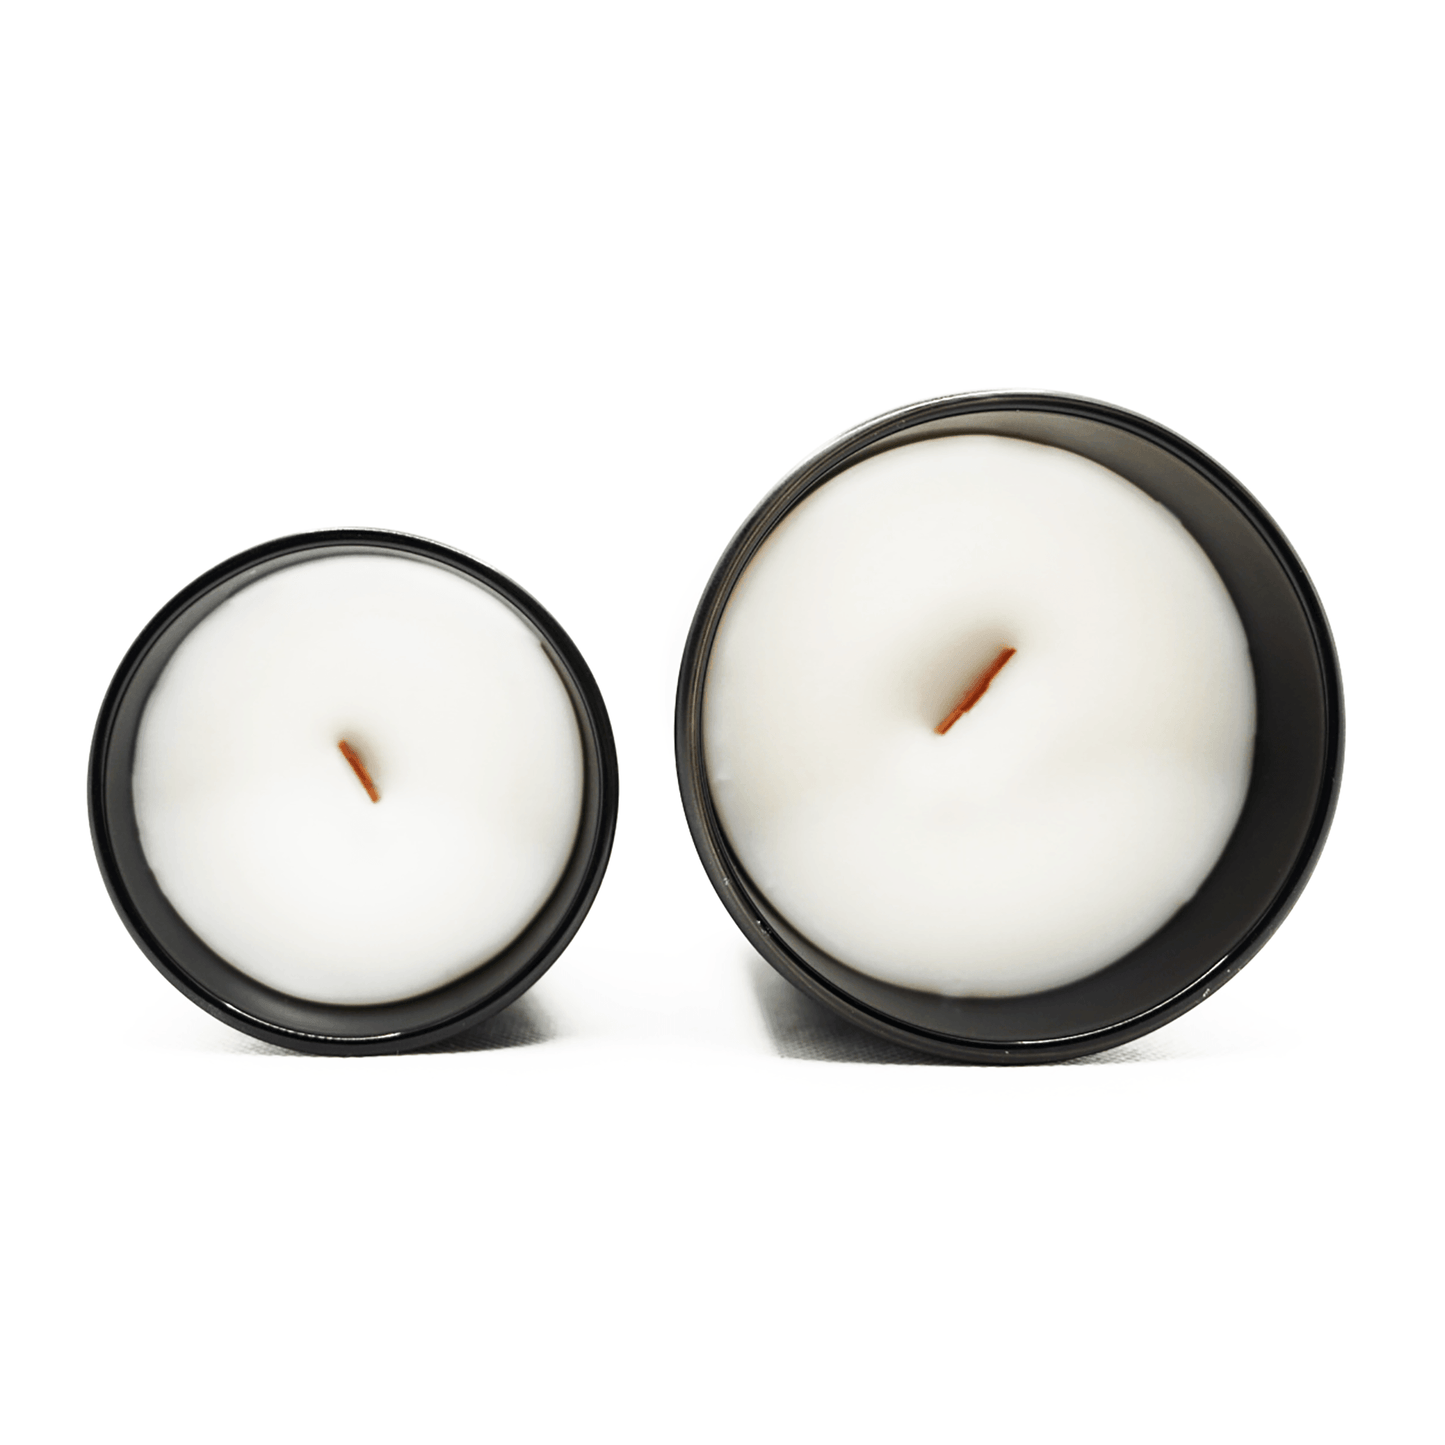 Hot & Bothered - Woodwick Candle - BADWAX